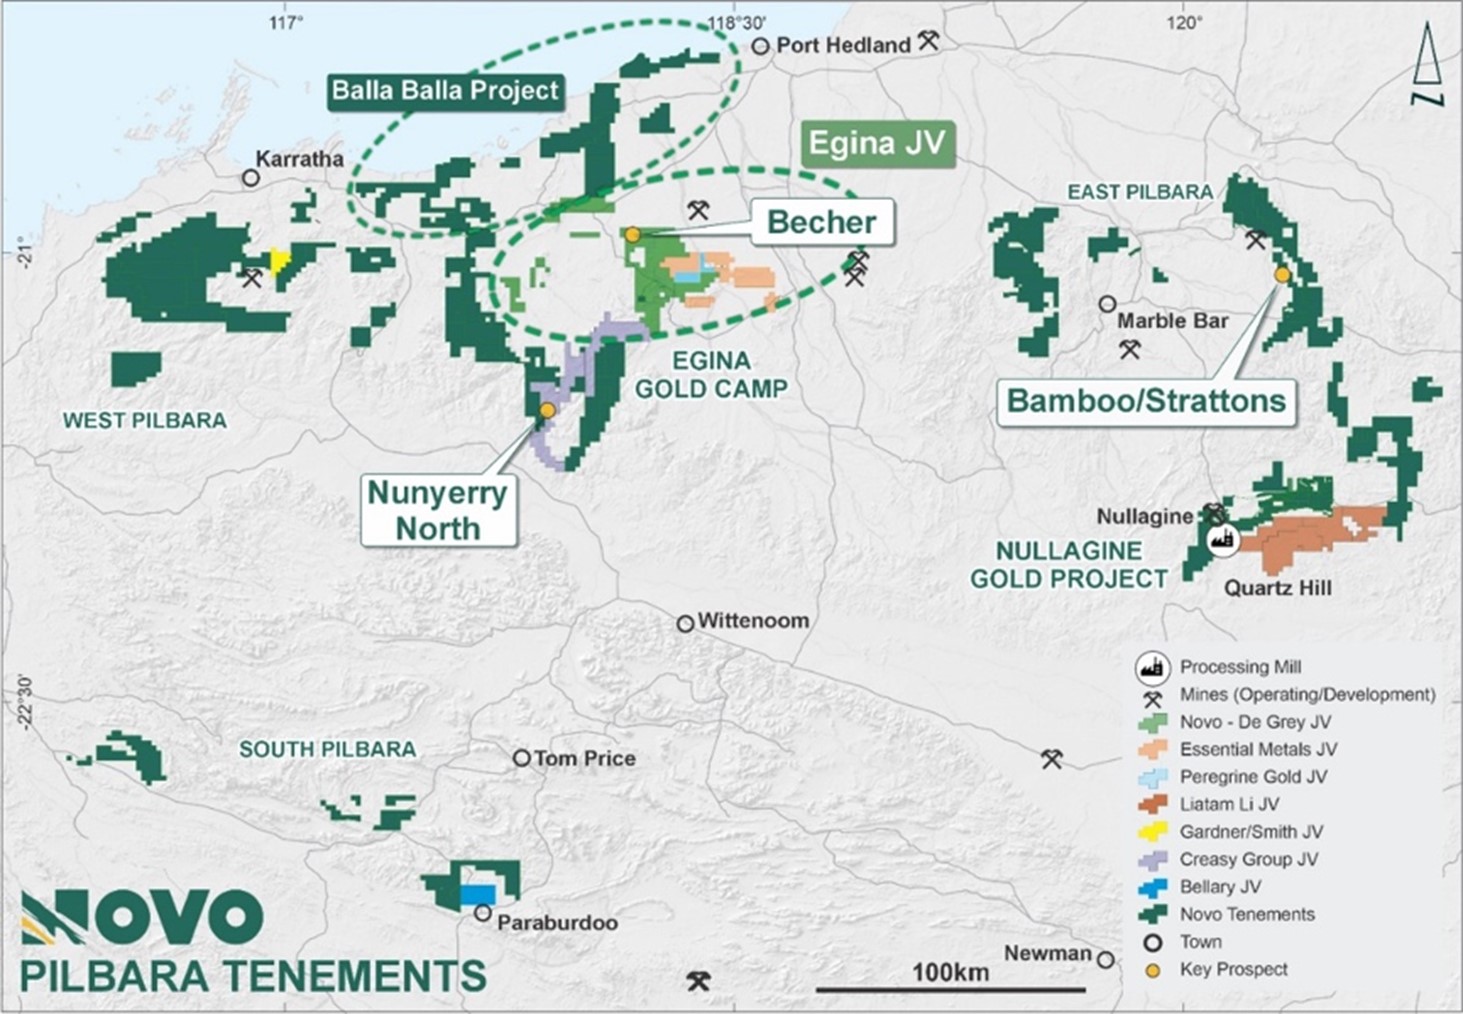 Figure 2: Novo’s Pilbara tenure, showing priority prospects and joint venture interests.